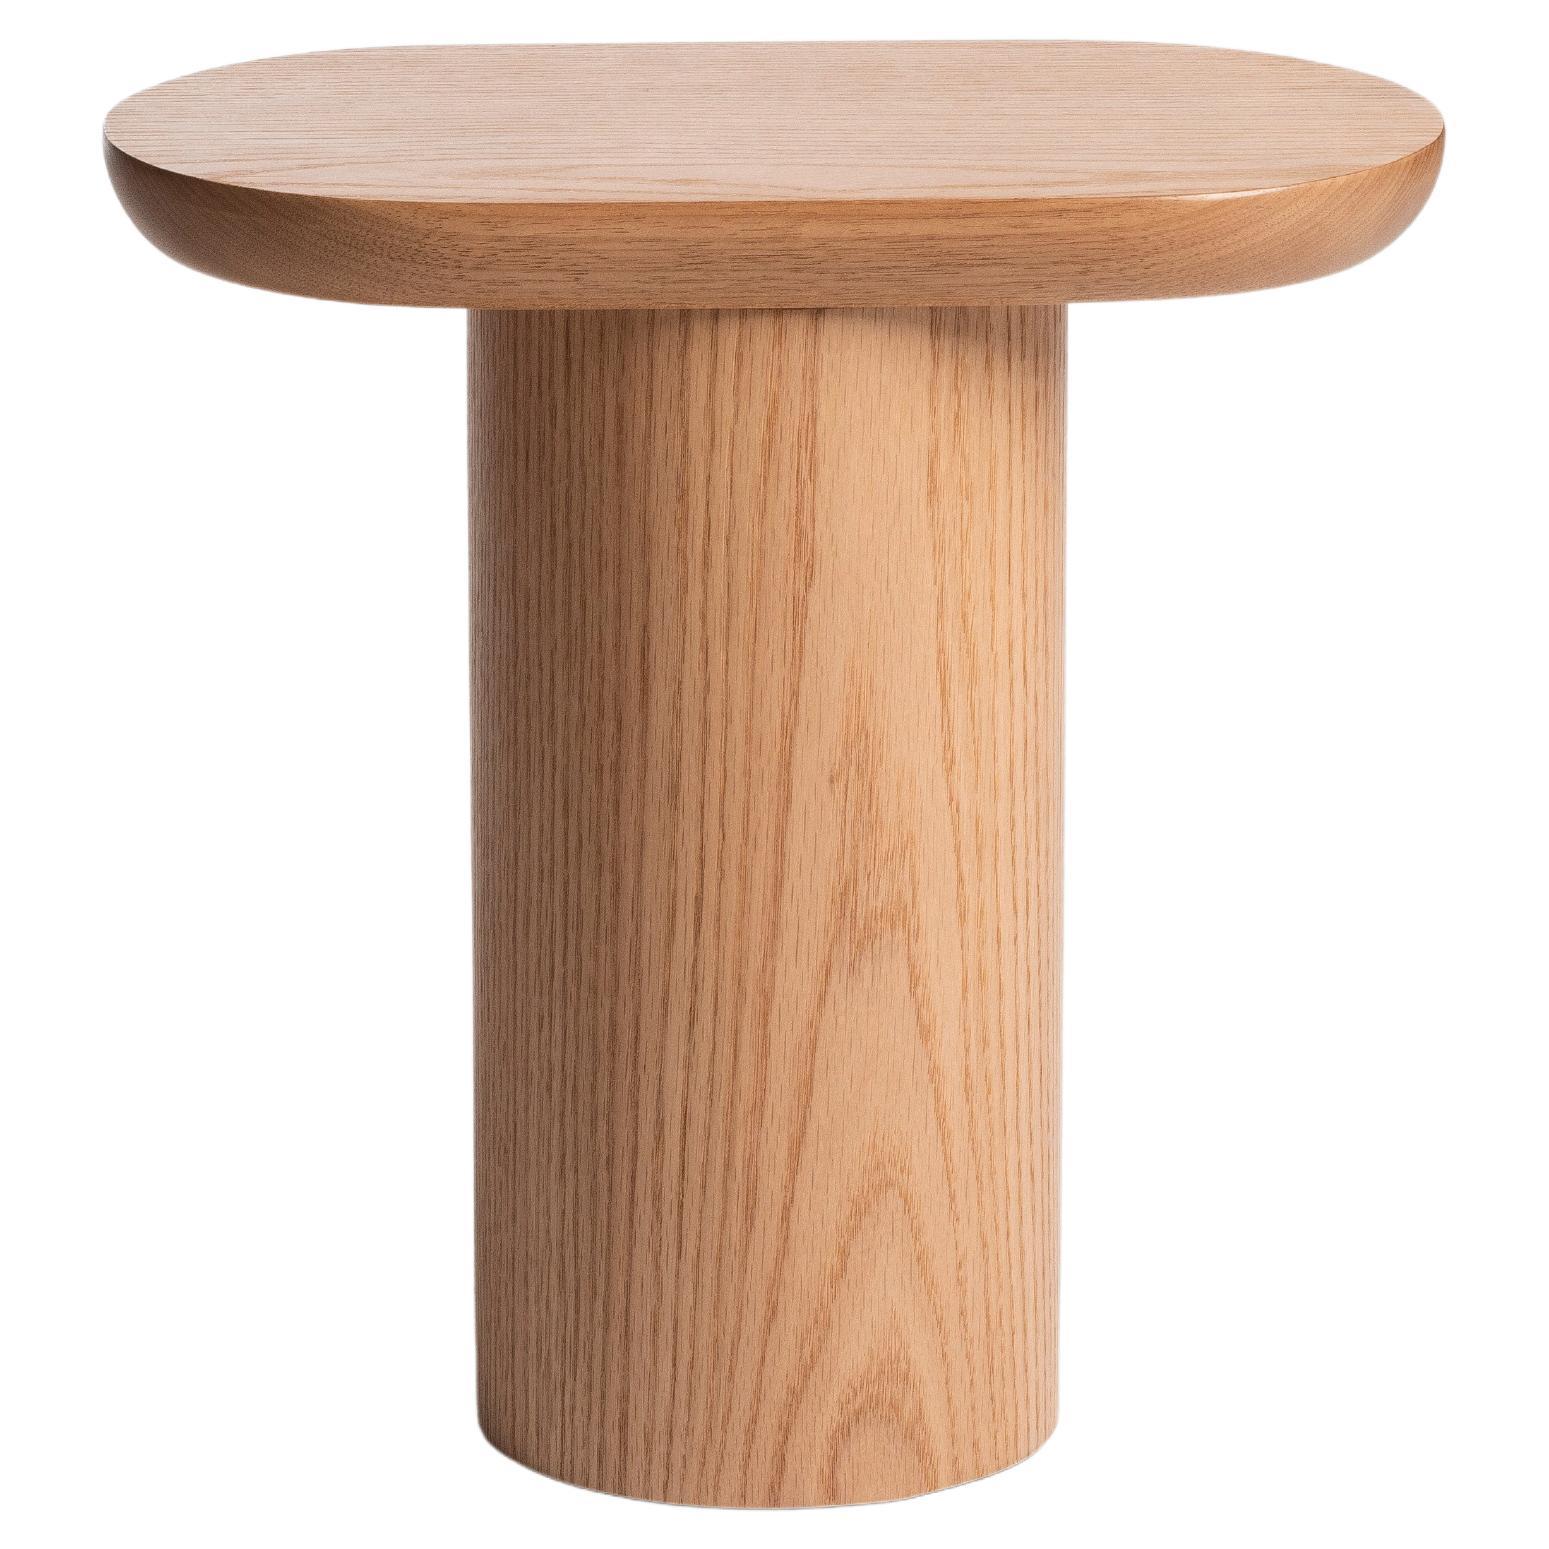 Porto Side Table, High, by Rain, Contemporary Side Table, Laminated Oak Wood